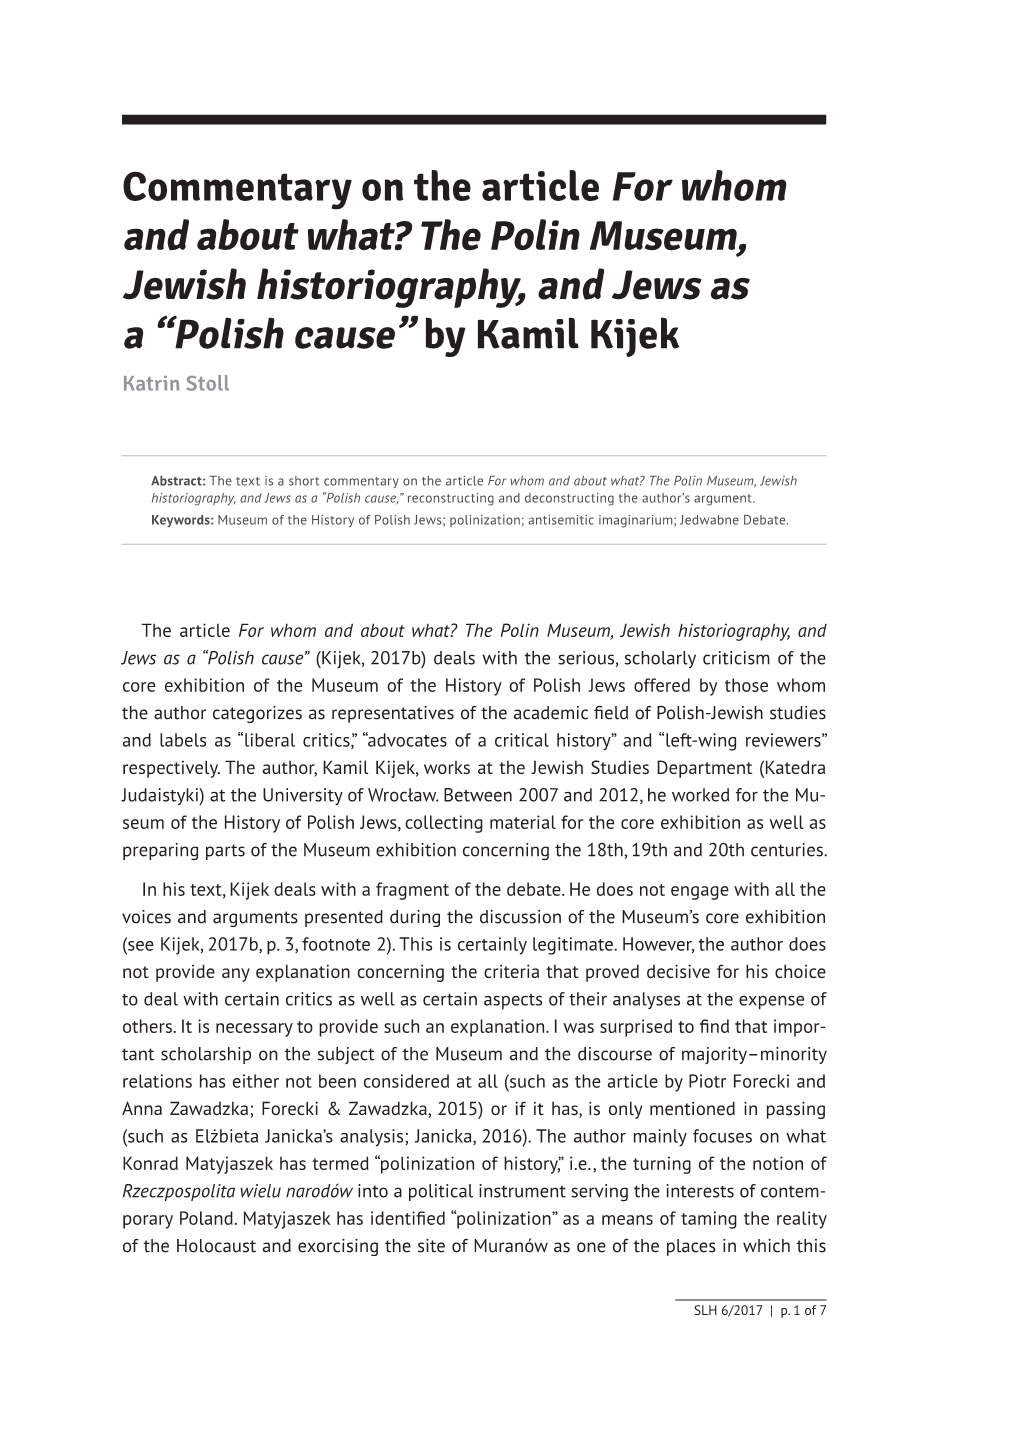 Commentary on the Article "For Whom and About What? the Polin